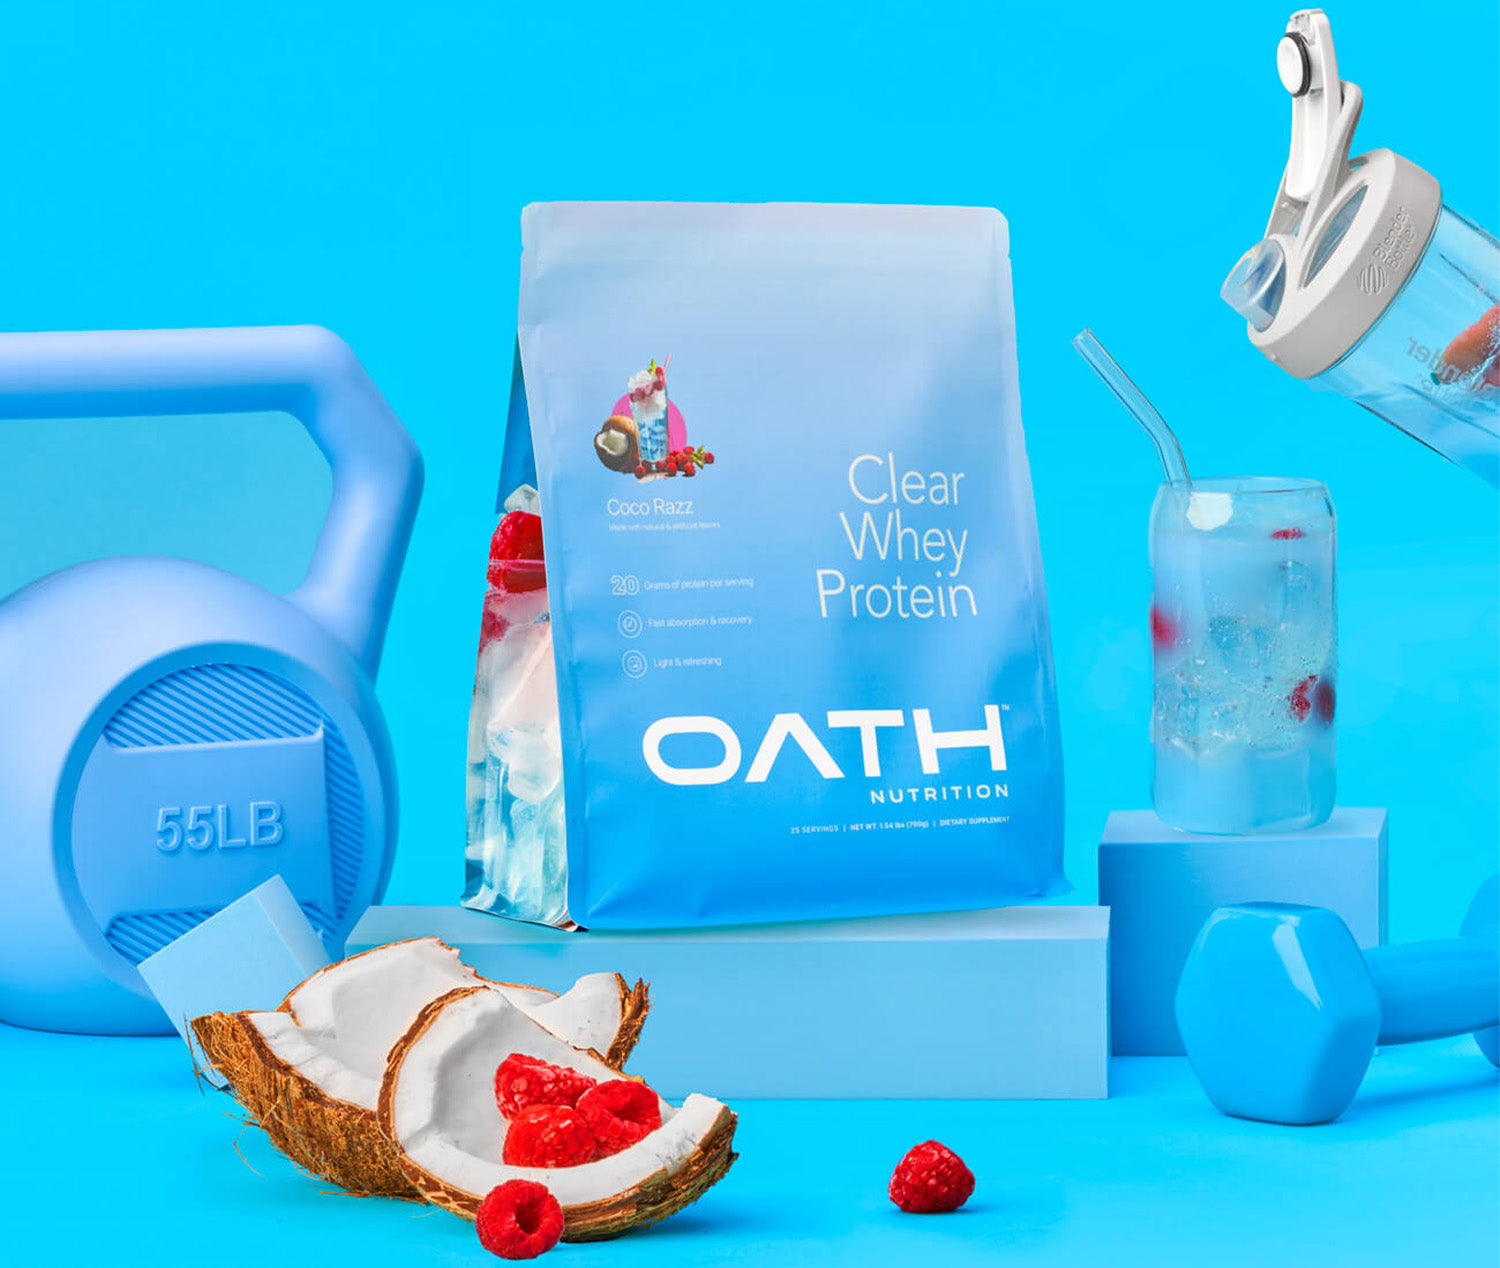 Oath Clear Whey Protein Coco Razz bag sitting in the middle of gym equipment. A BlenderBottle shaker bottle pours protein into a glass on the right side.